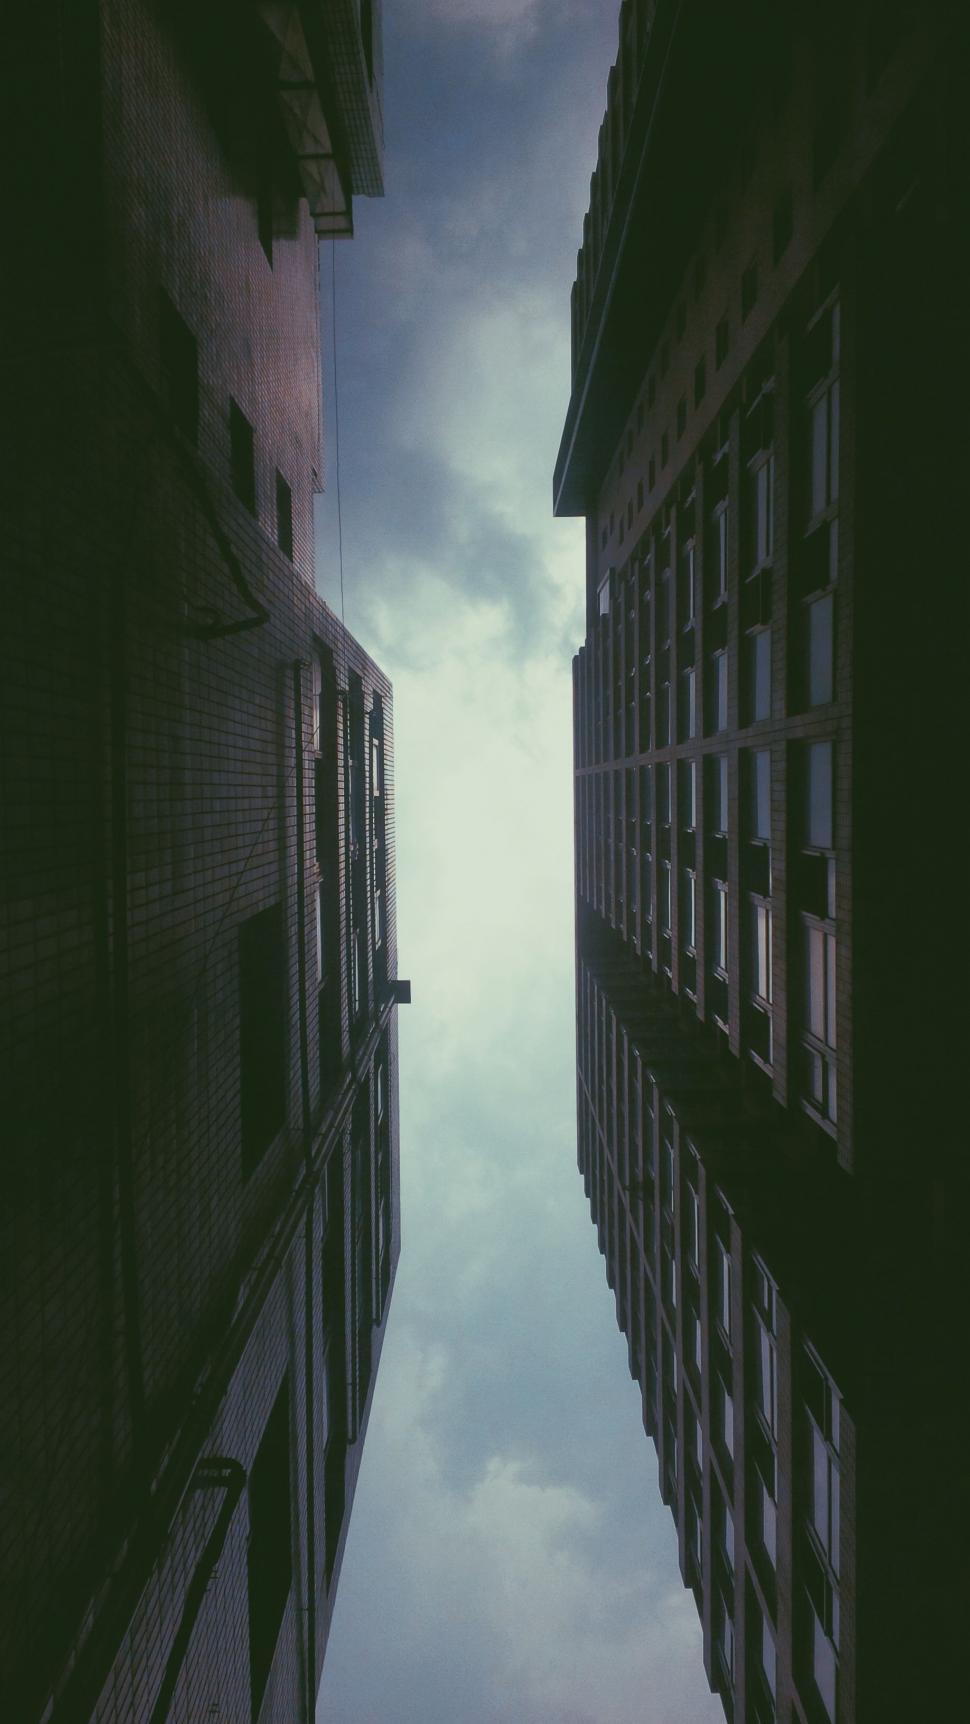 Free Image of View of a Very Tall Building From the Ground 